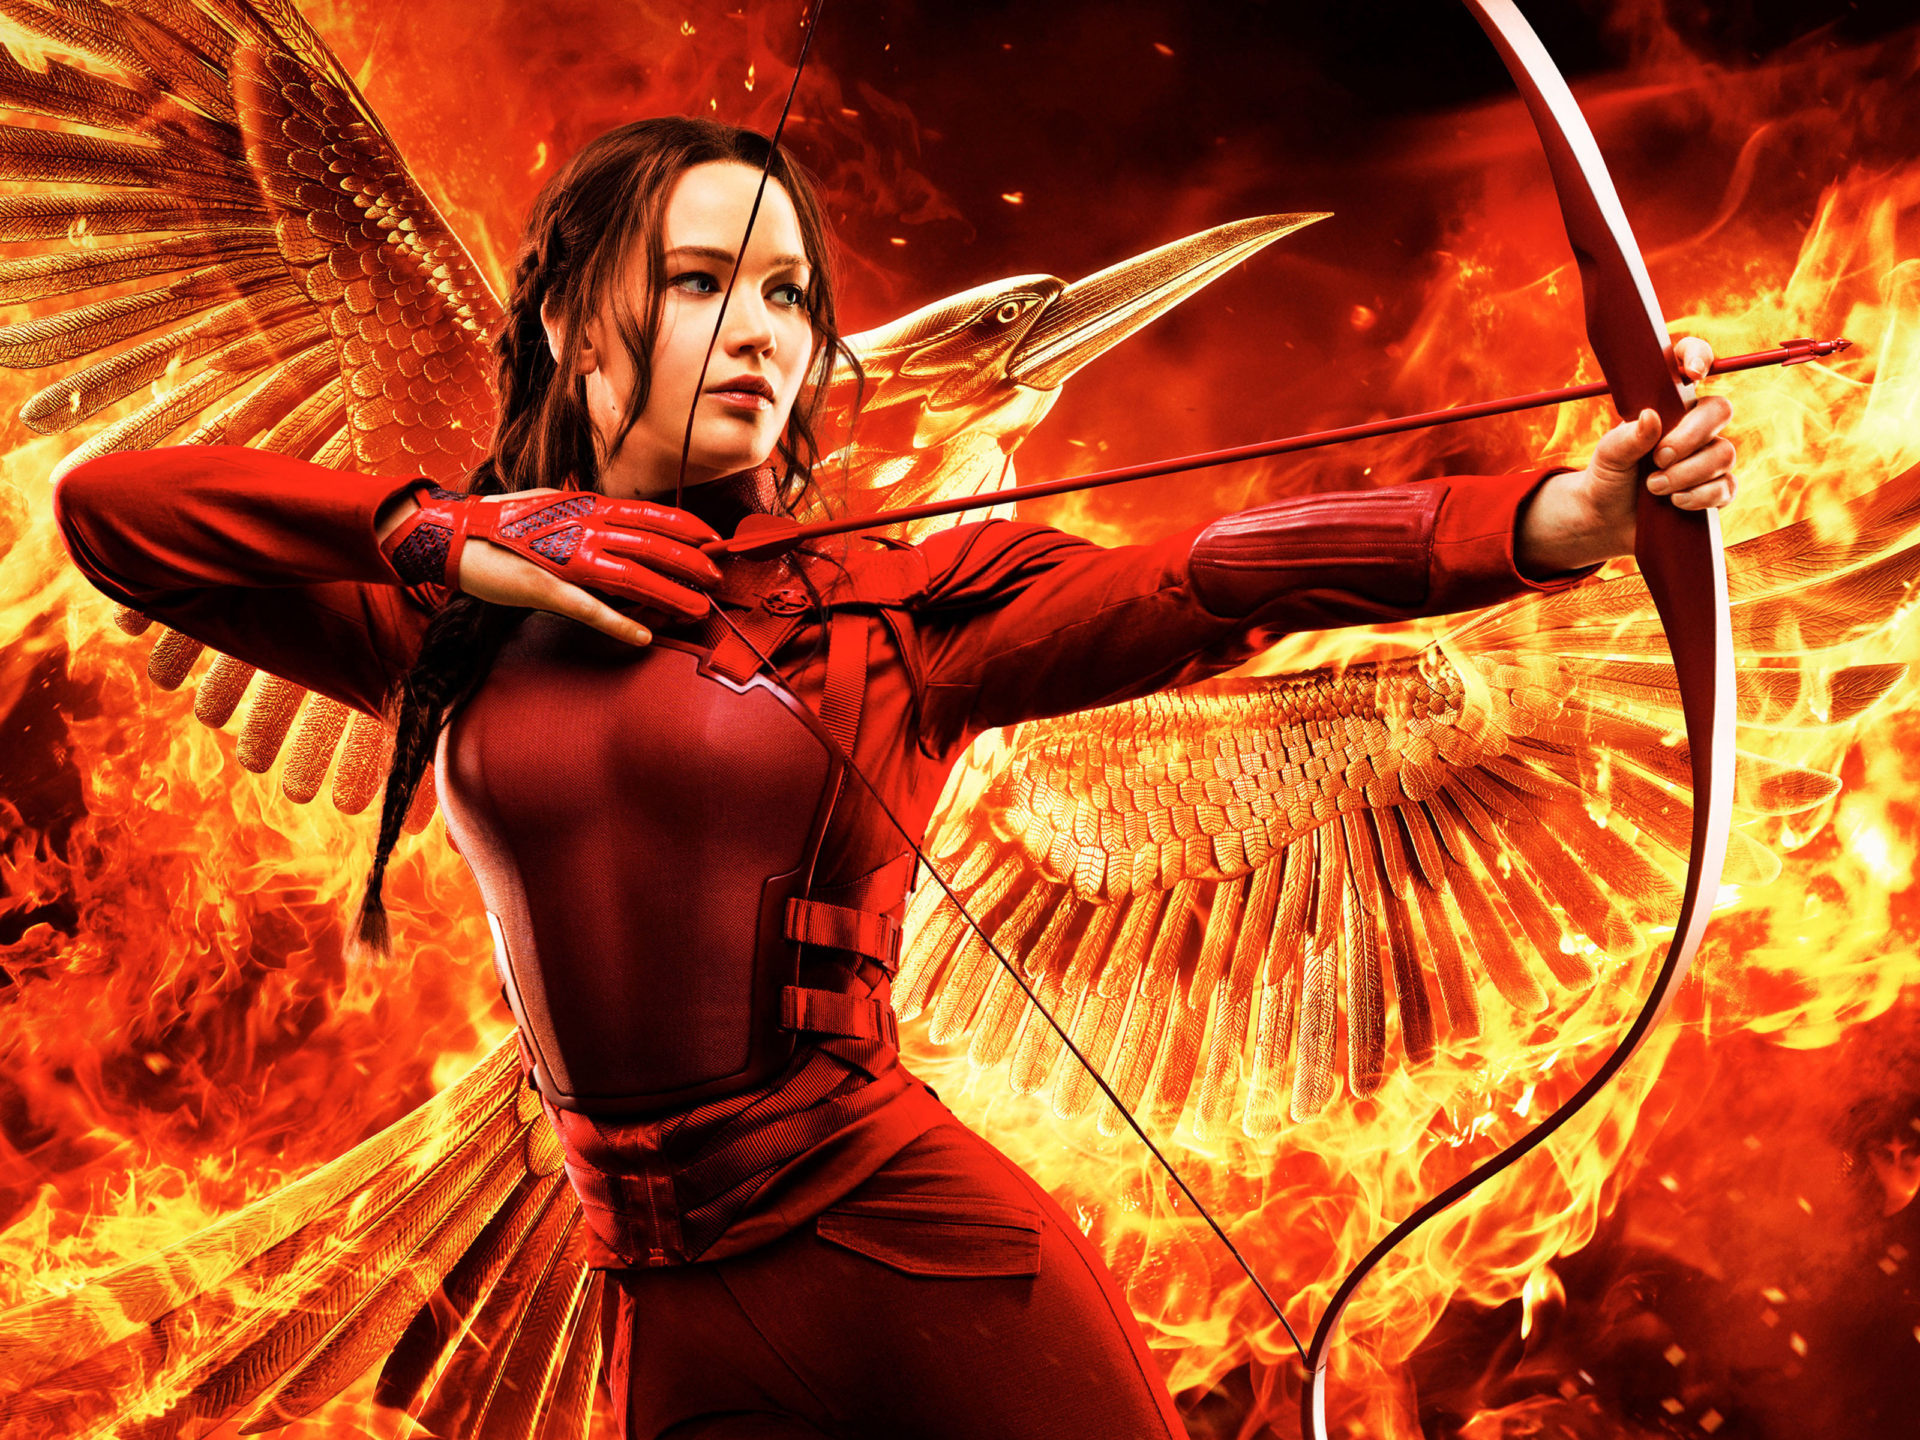 Hunger Games: Mockingjay Part 2, The fourth installment in the film series. 1920x1440 HD Background.